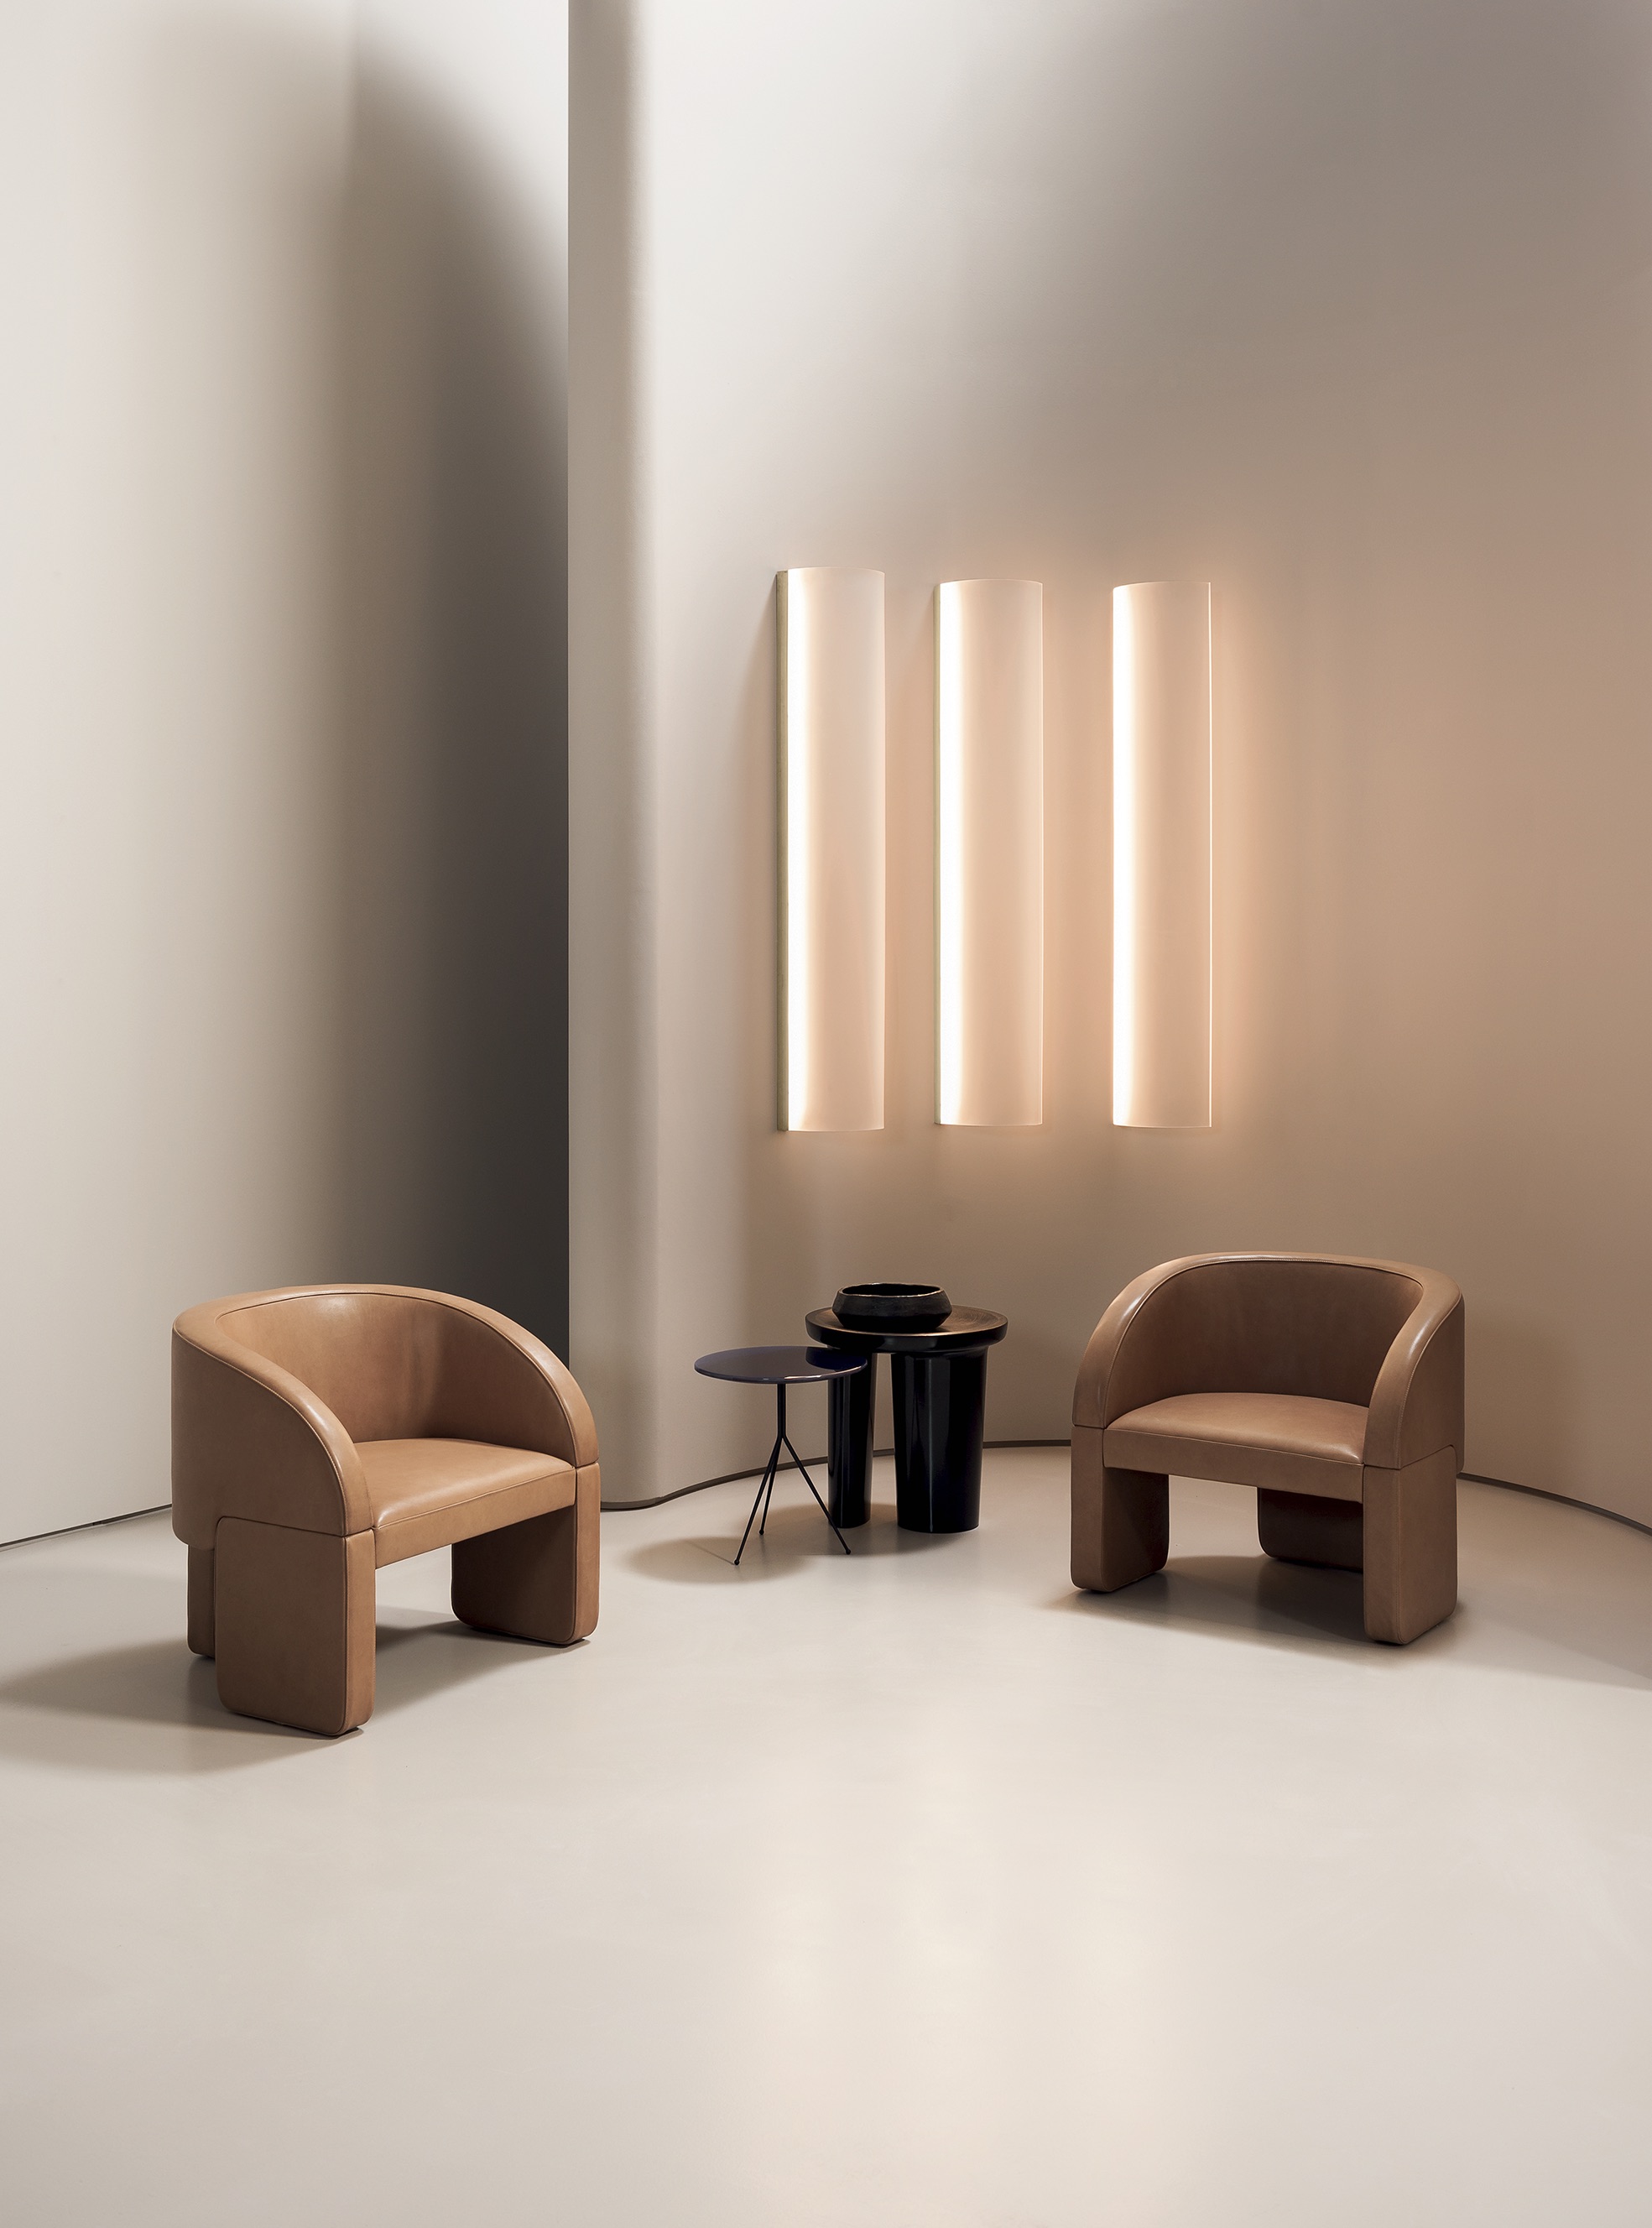 Baxter Miami Presents International Buyers With The Lazybones Chair Collection